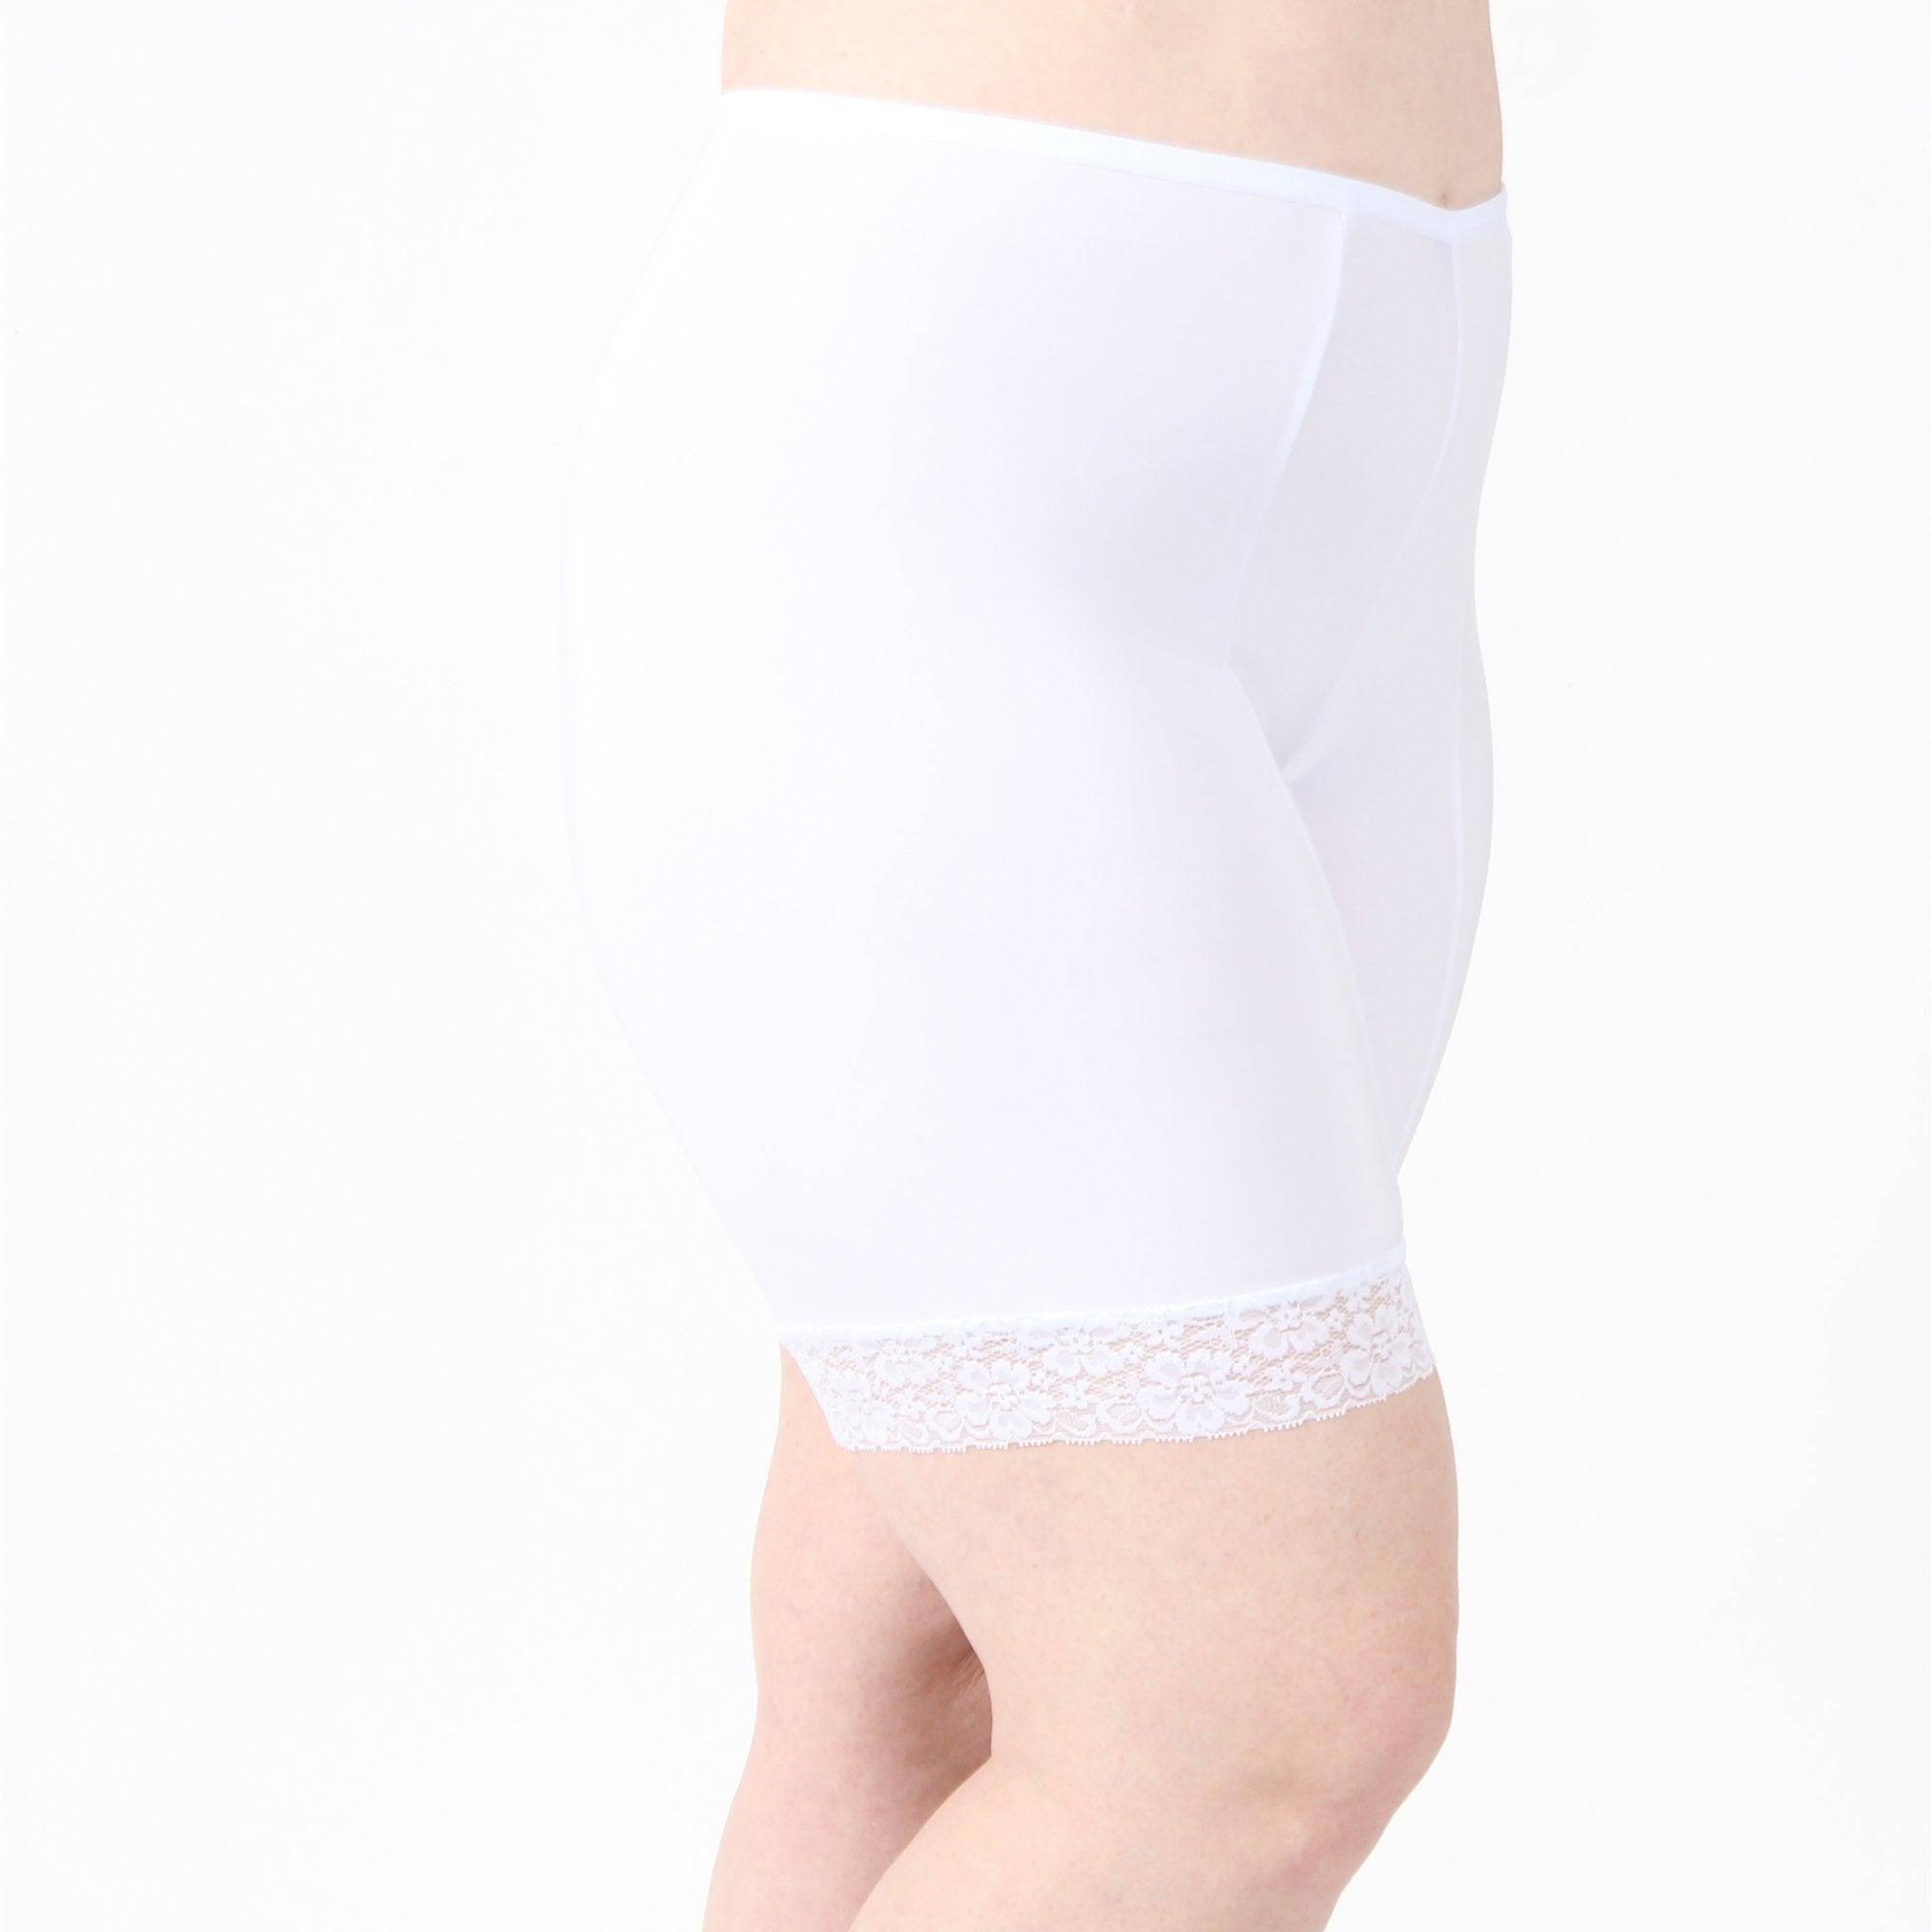 Say goodby to the discomfort of chafing thighs